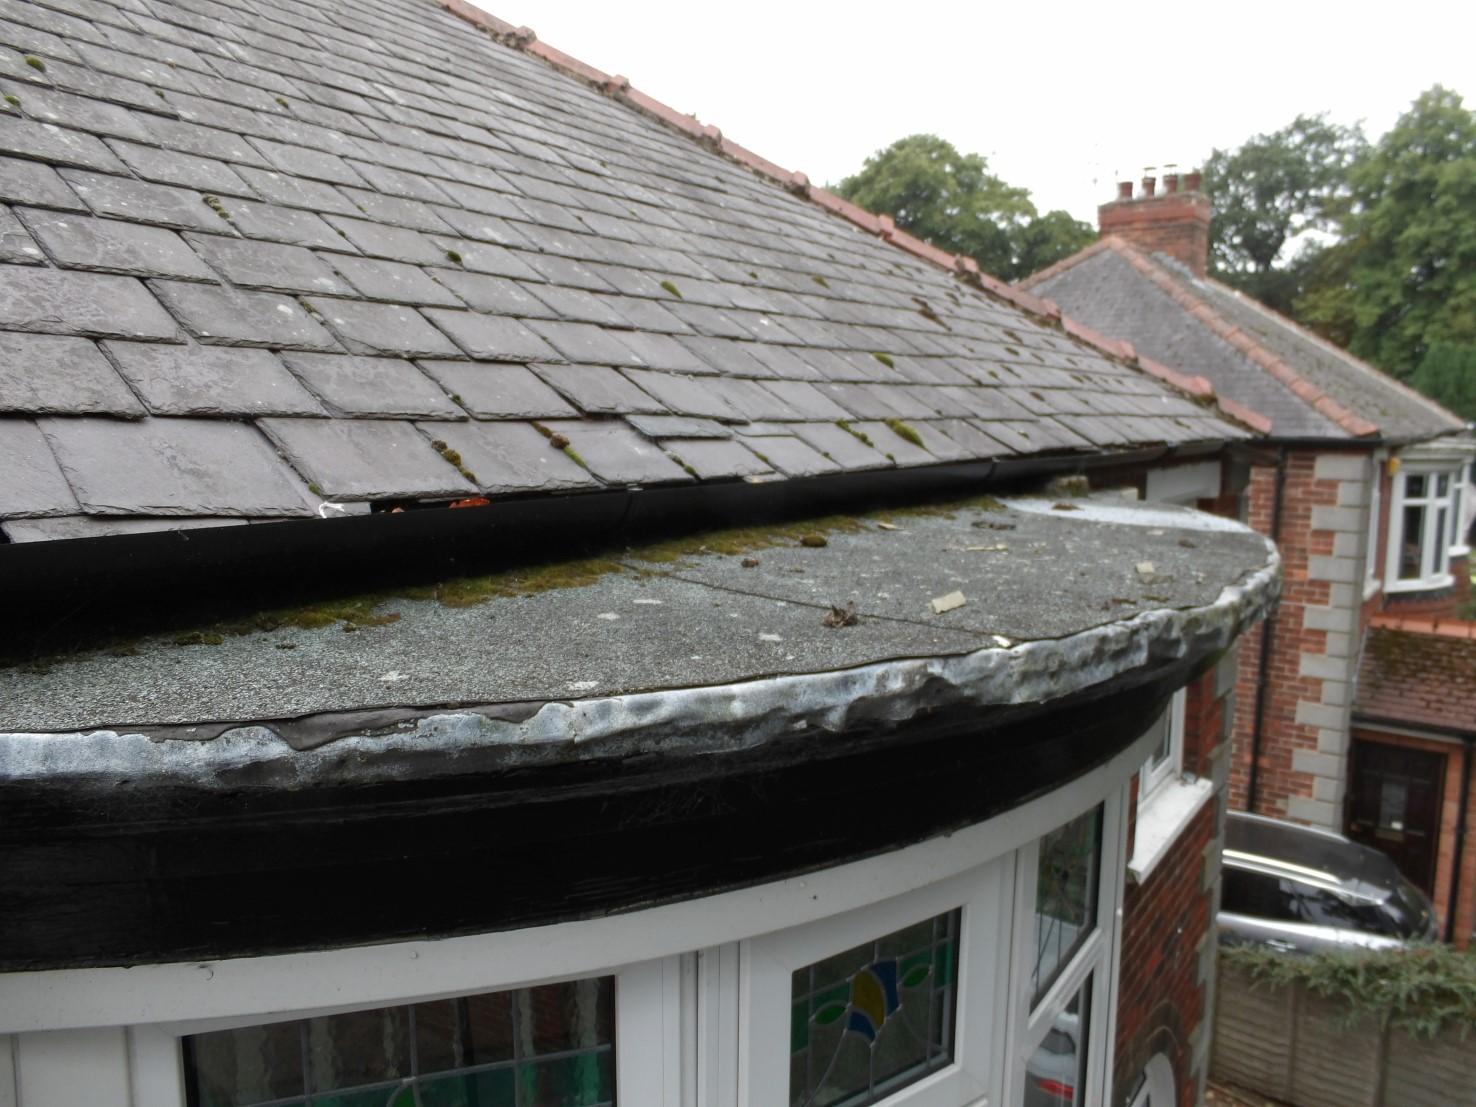 Bitumen felt laid on top of a lead covered roof of a bay window.